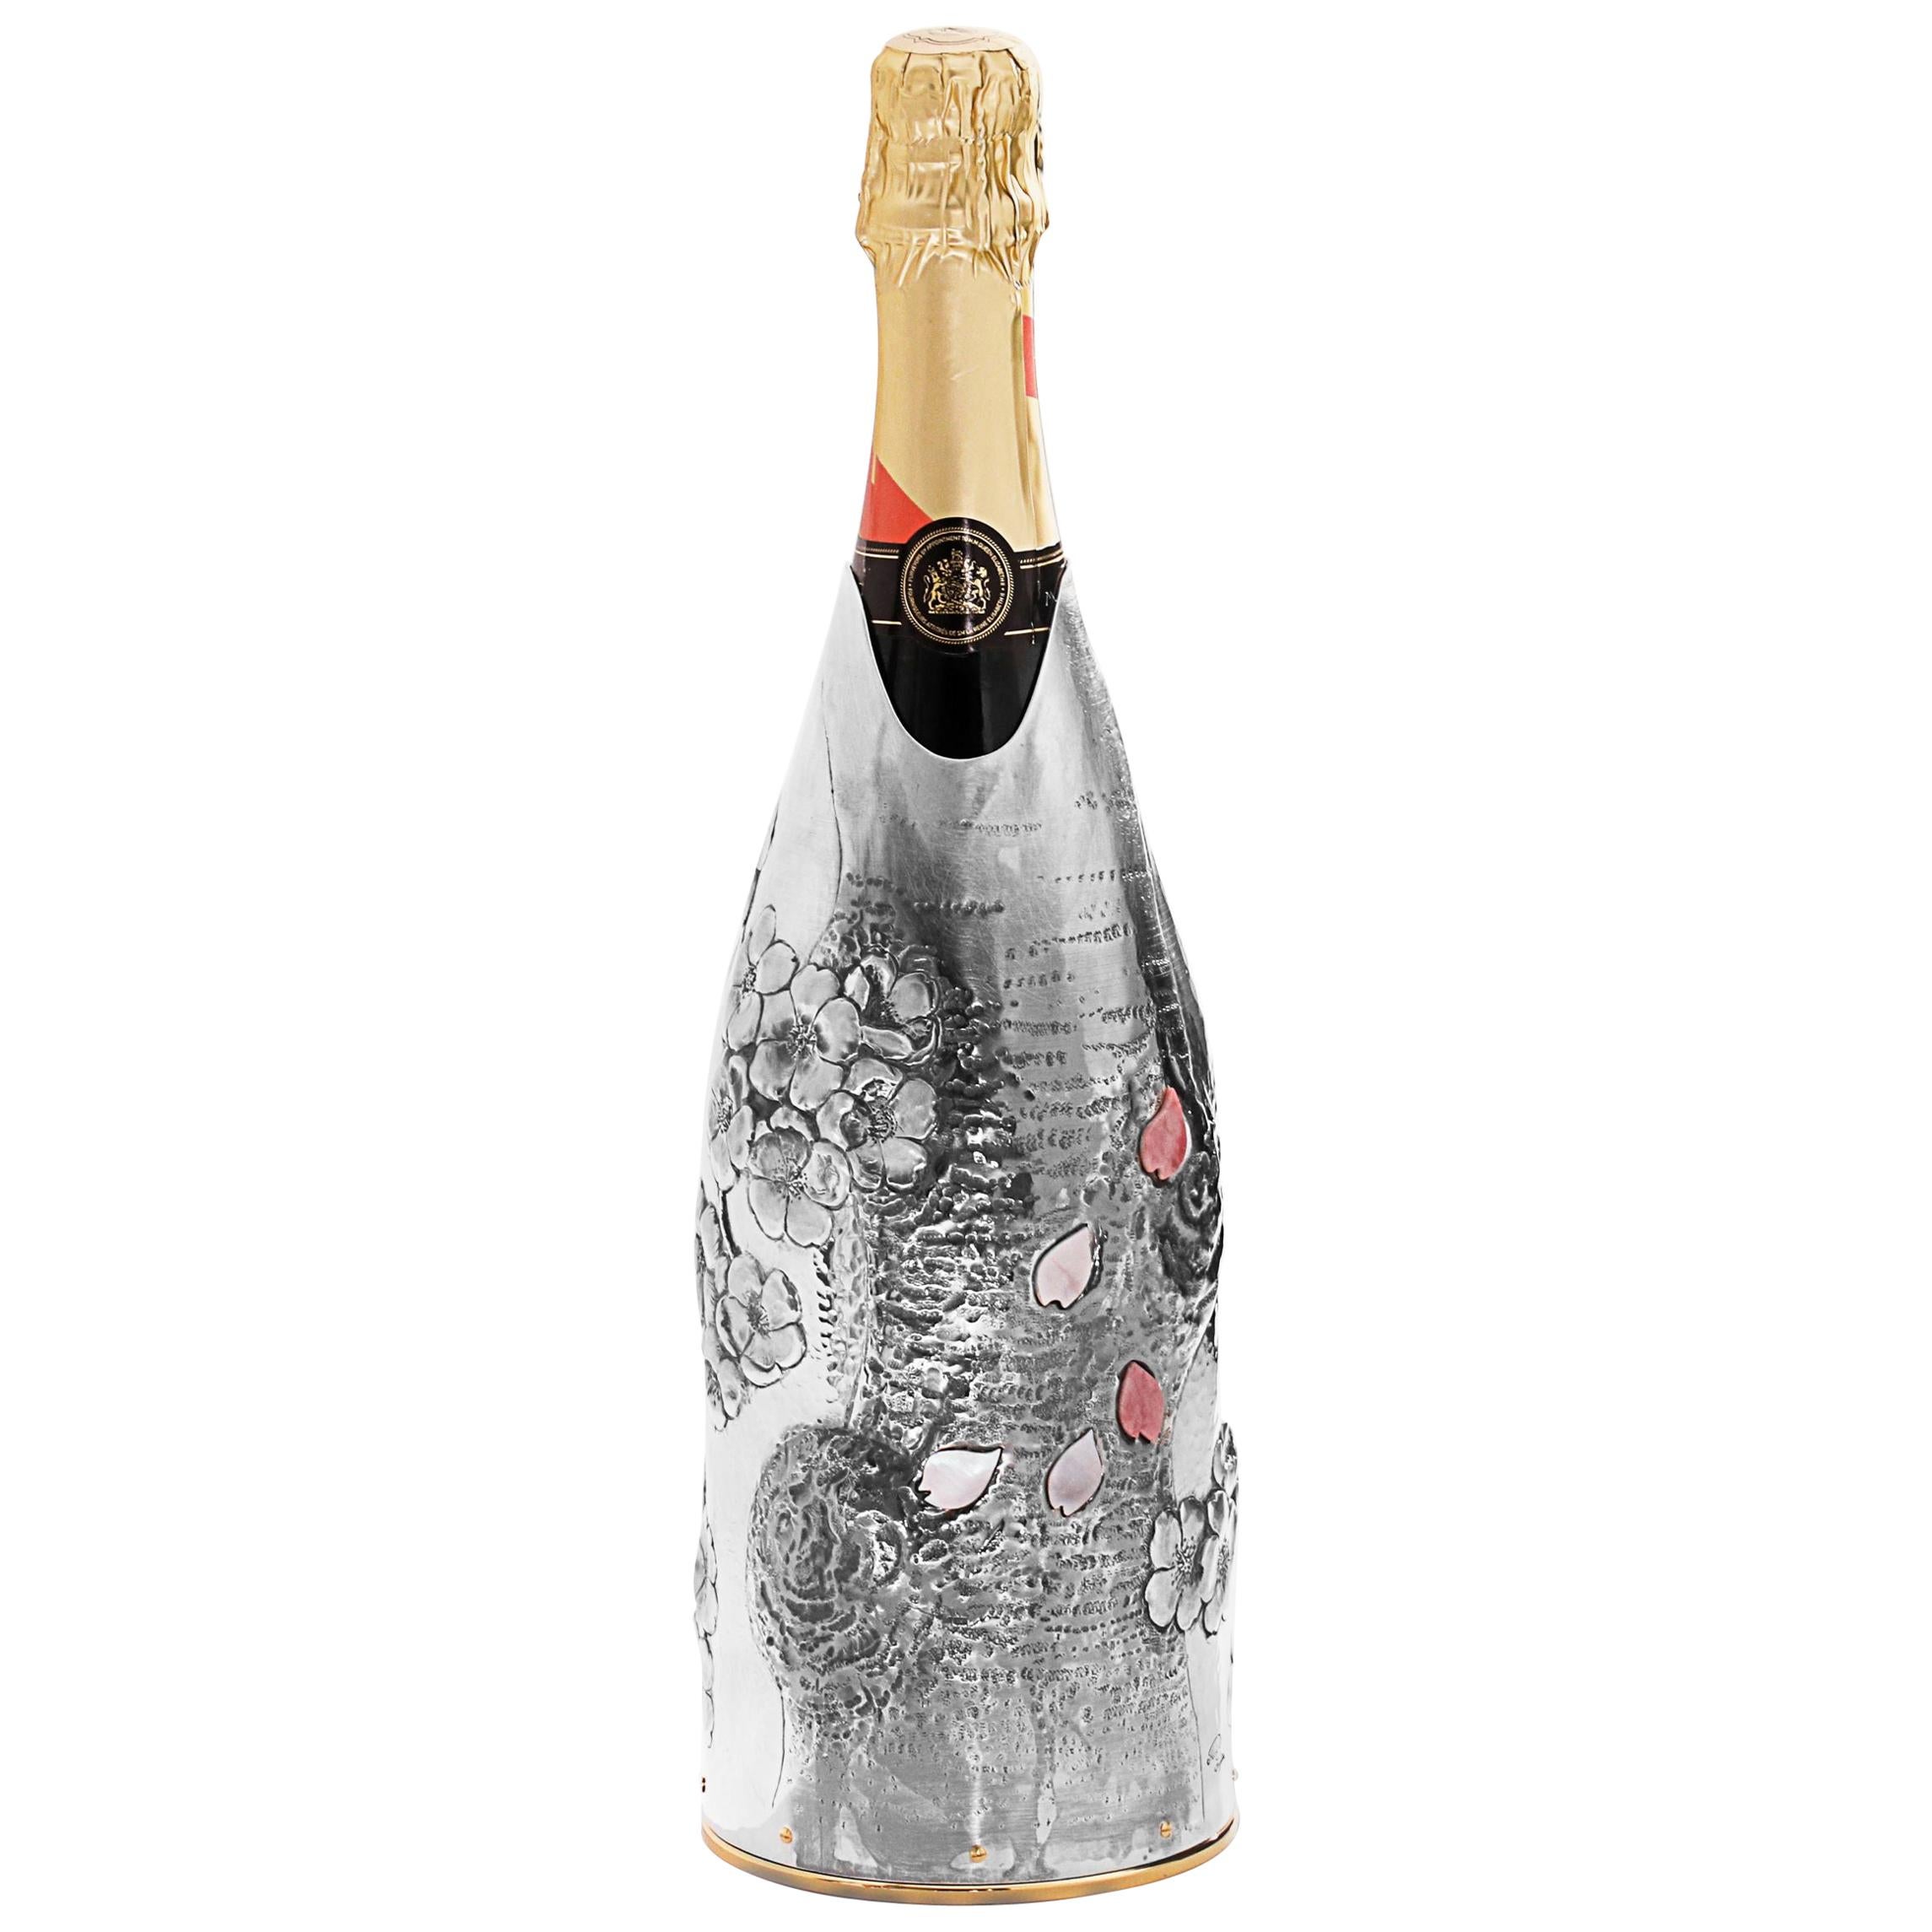 This champagne cover belongs to our collection “K-over Art”. The oeuvre was manufactured by a Japanese artist who wanted to celebrate her homeland. Indeed, she chiselled on a pure silver 999/°° K-OVER a cherry blossom. This masterpiece has been